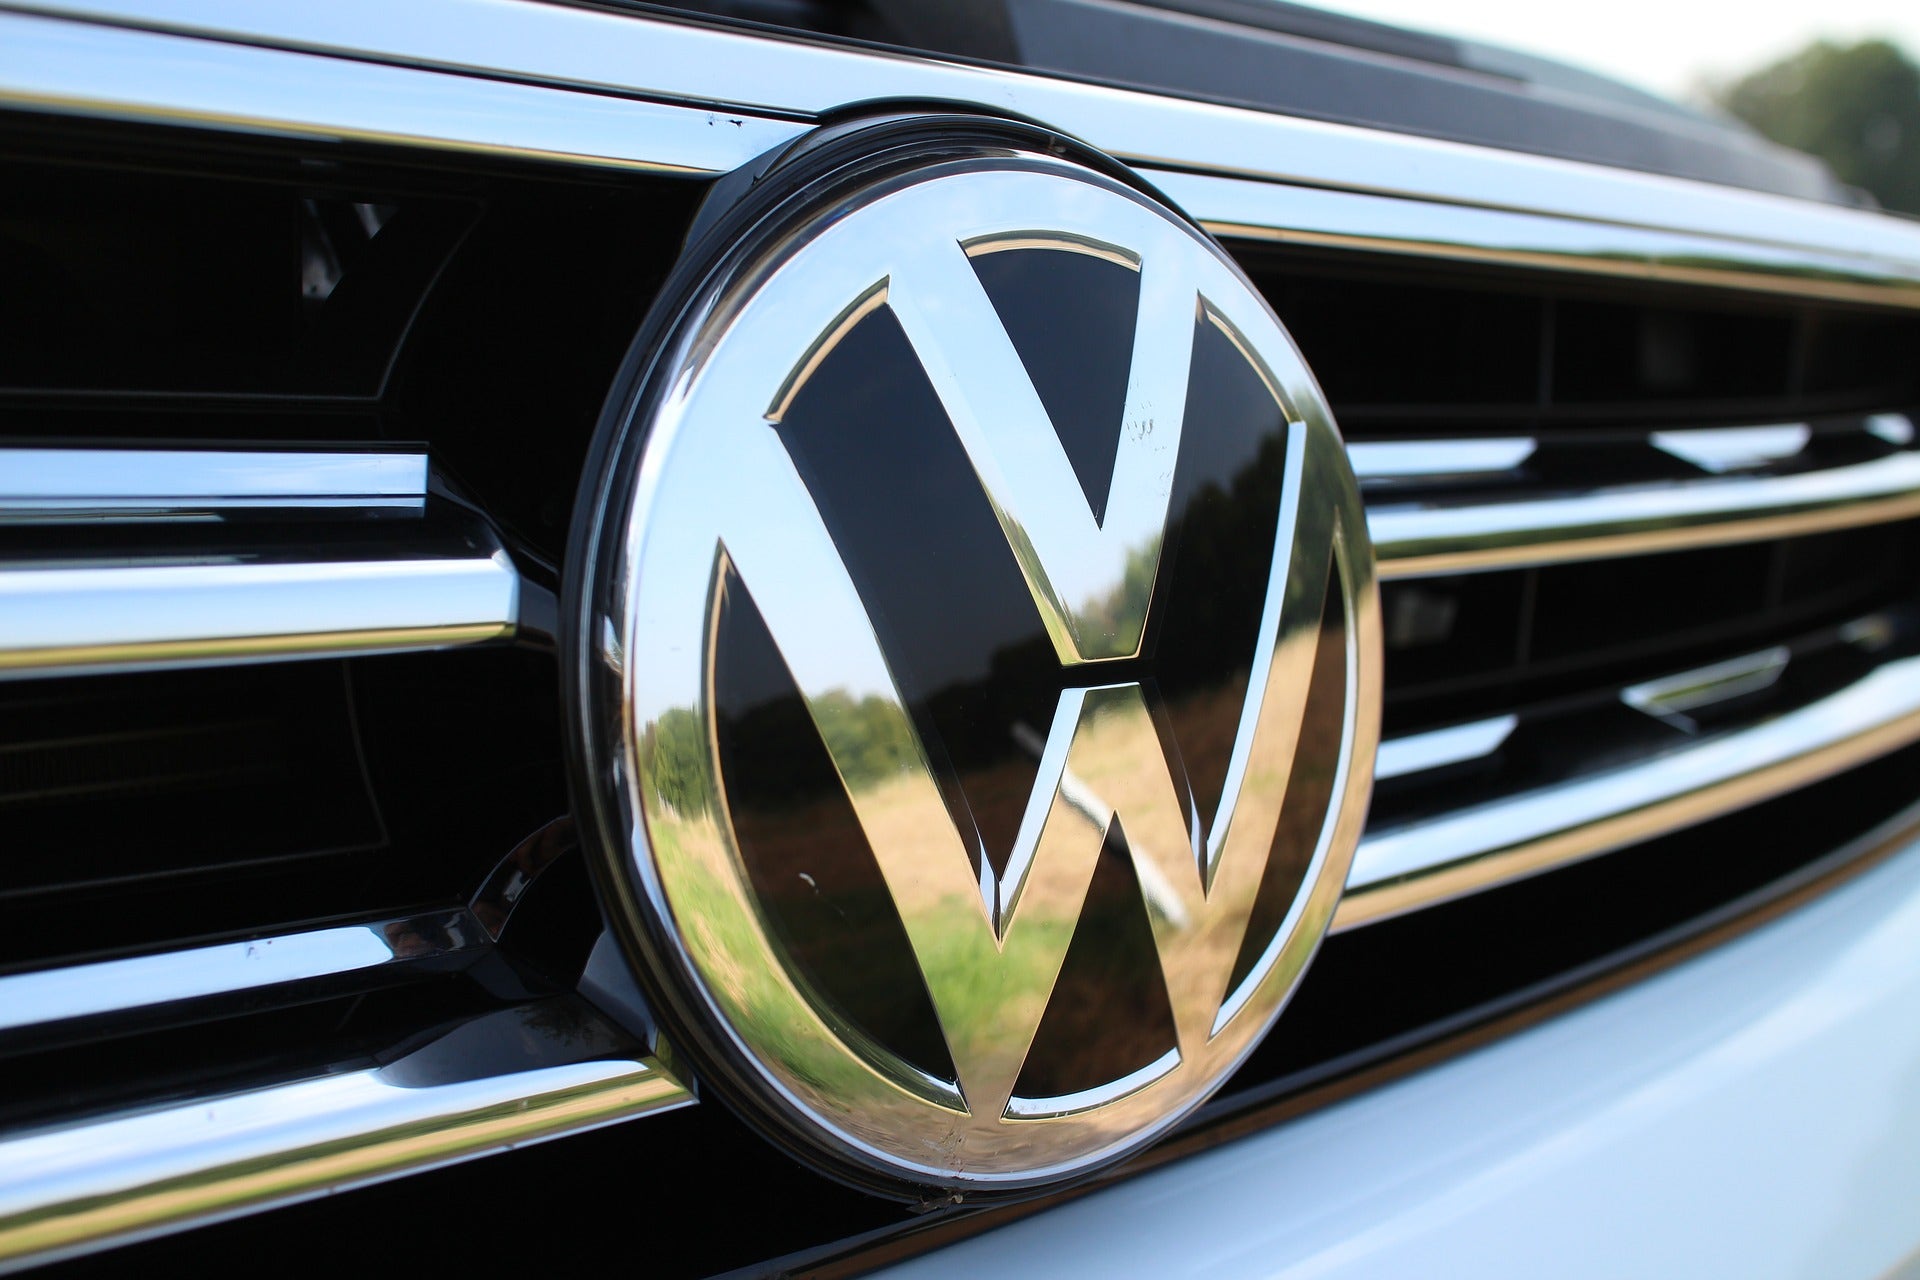 To Compete With Tesla, Volkswagen Injects $2.3B In Chinese Autonomous Driving Venture